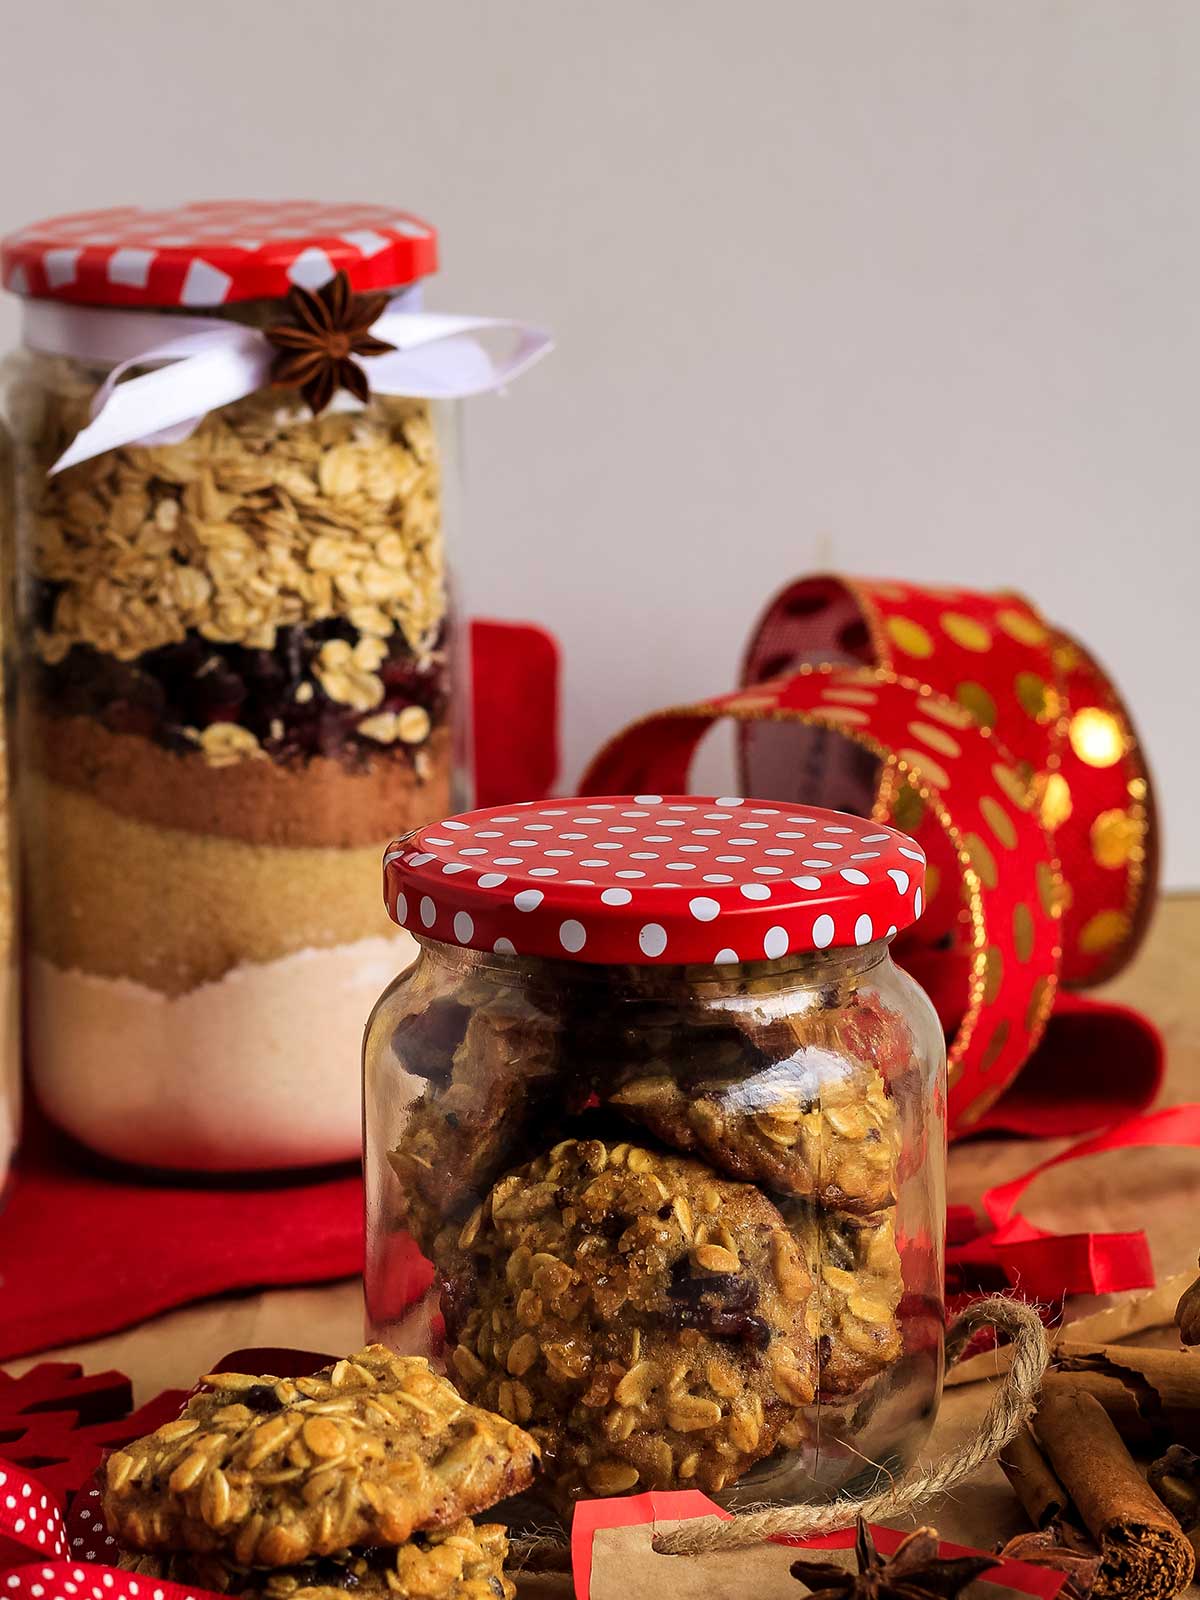 Baked cookies in a jar to give as a gift.